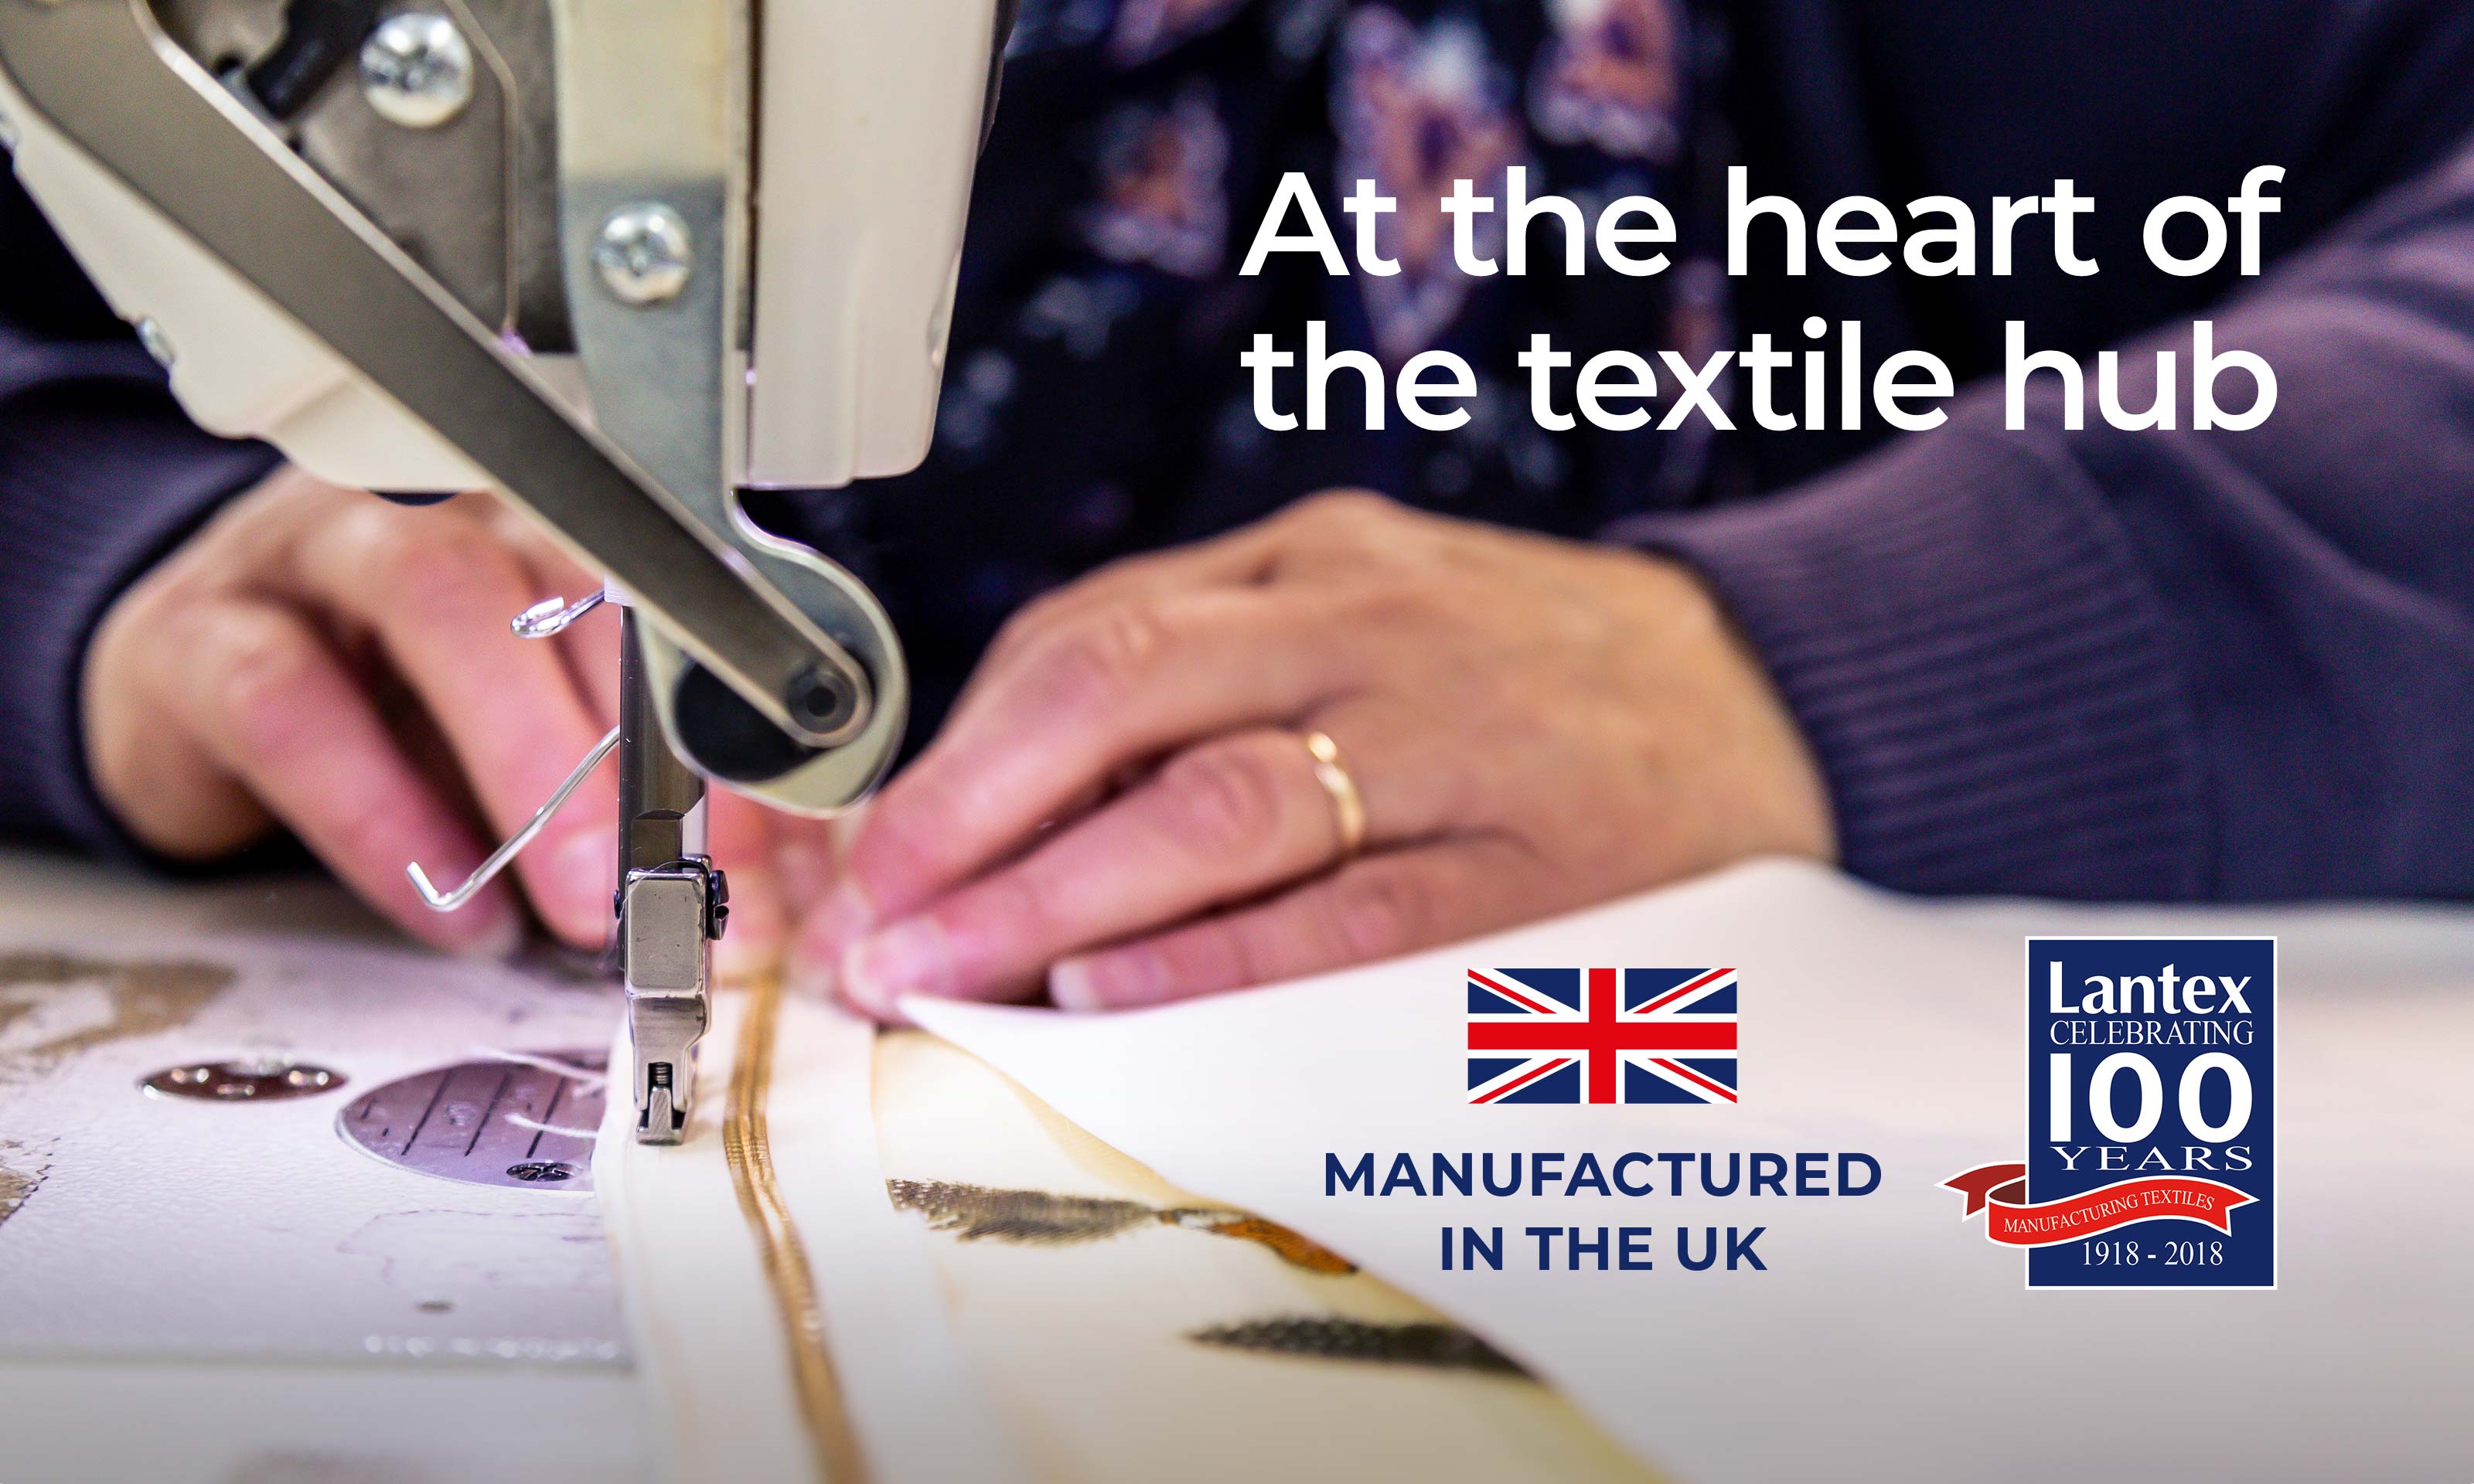 At the heart of the textile hub